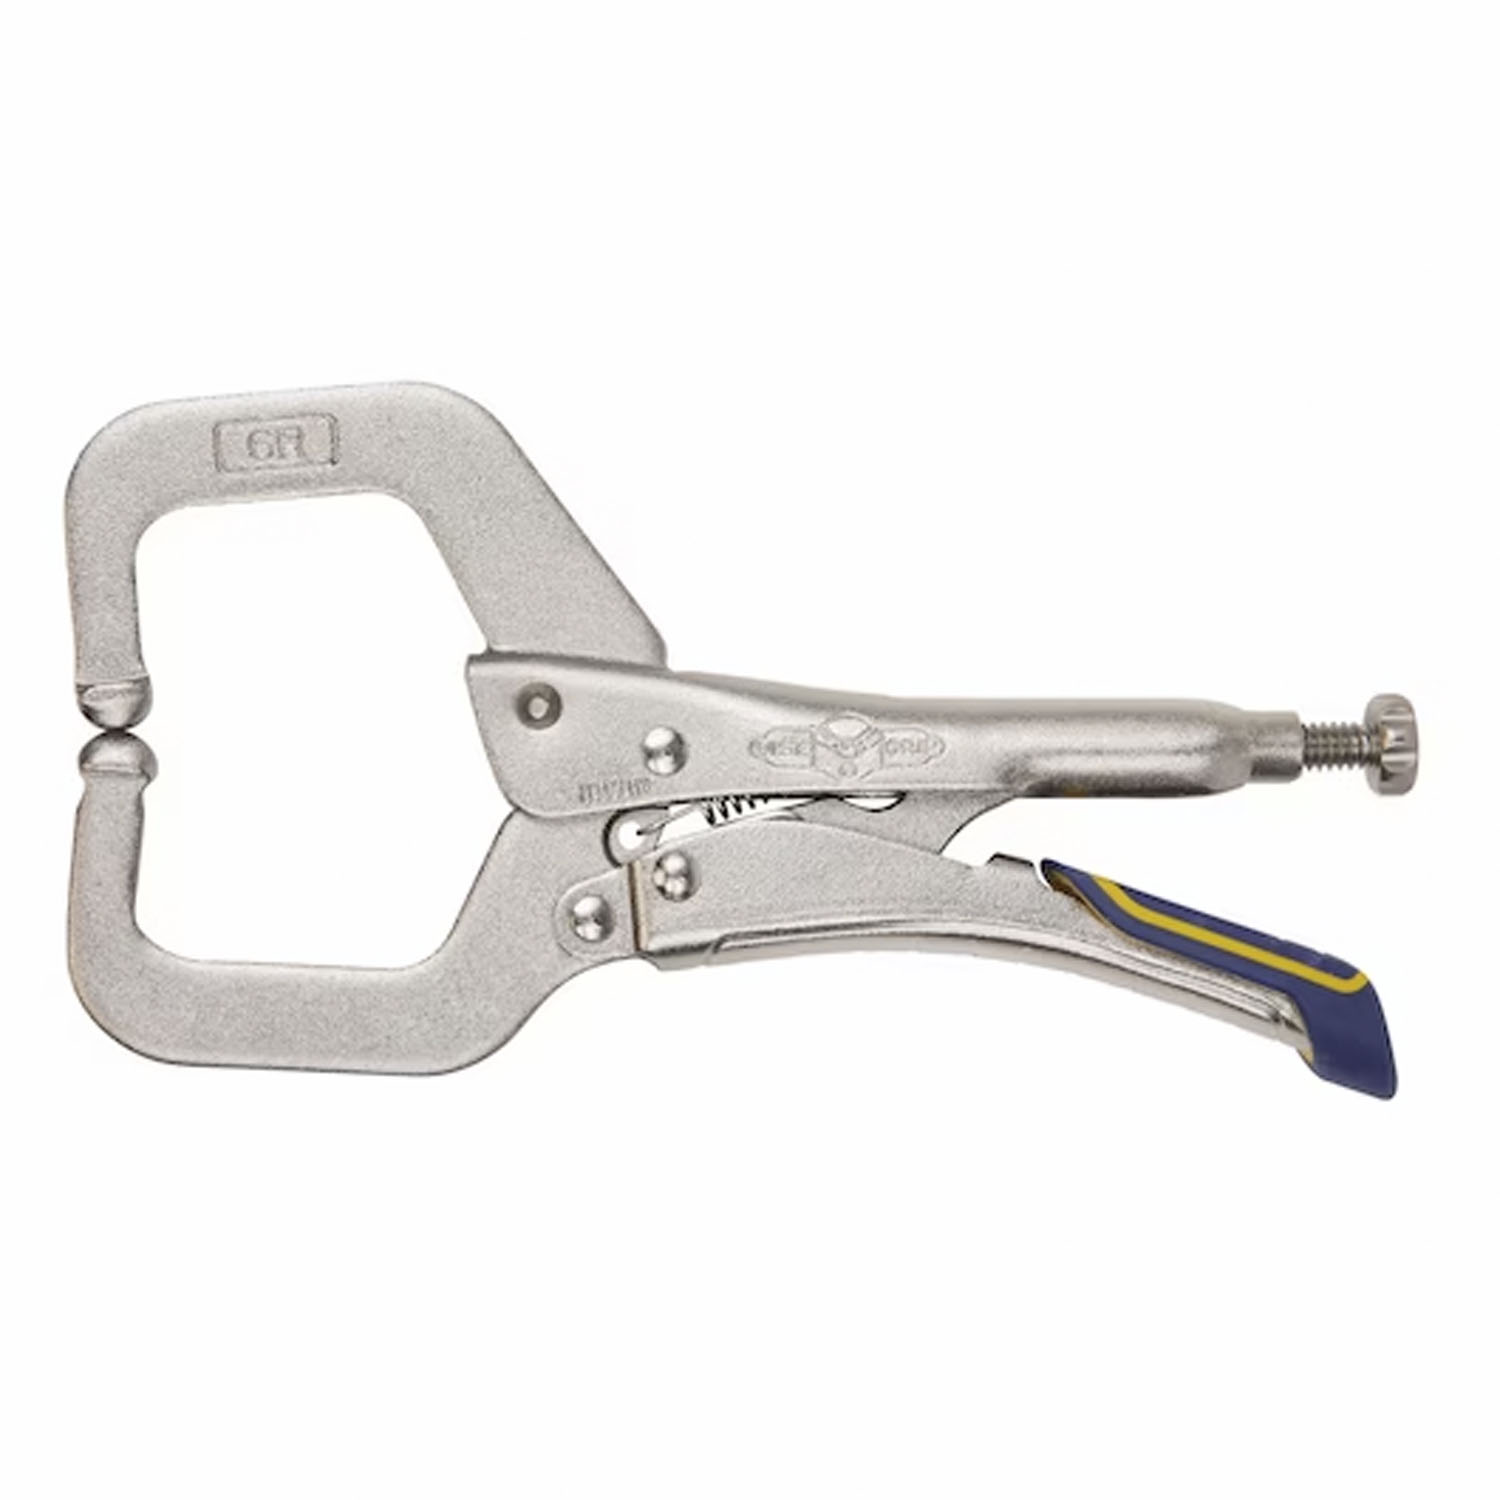 6 IN. 17 T VISE-GRIP FAST RELEASE LOCKING CLAMP